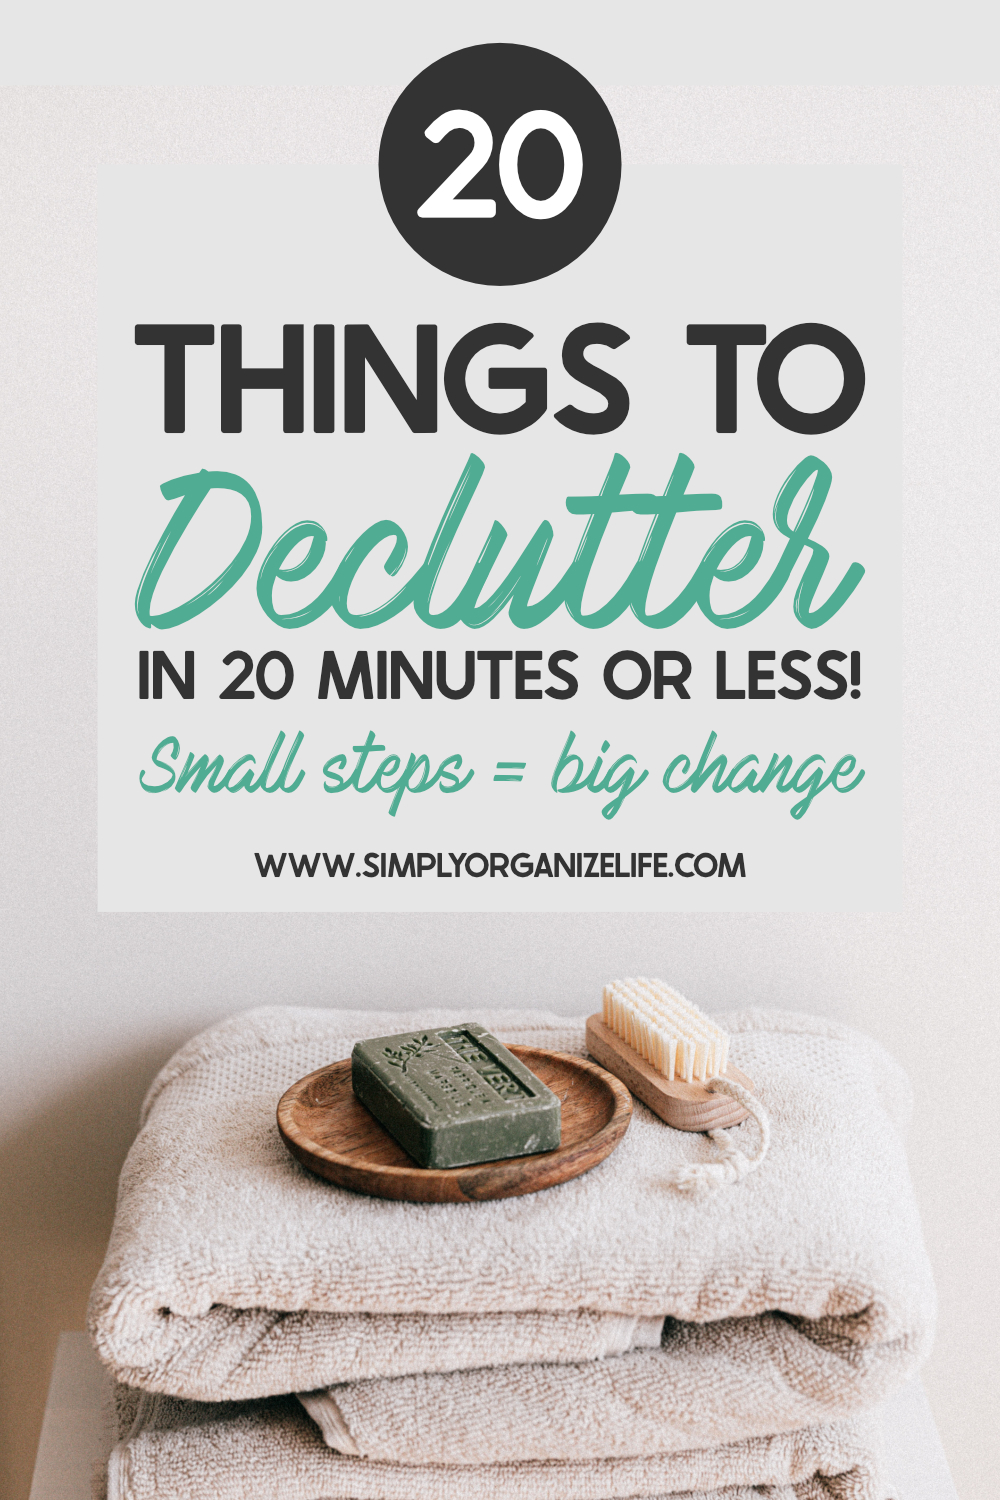 SIMPLY-ORGANIZE-LIFE-DECLUTTER-YOUR-HOME-30-THINGS-TO-DECLUTTER-TODAY-Blog-Image.jpg